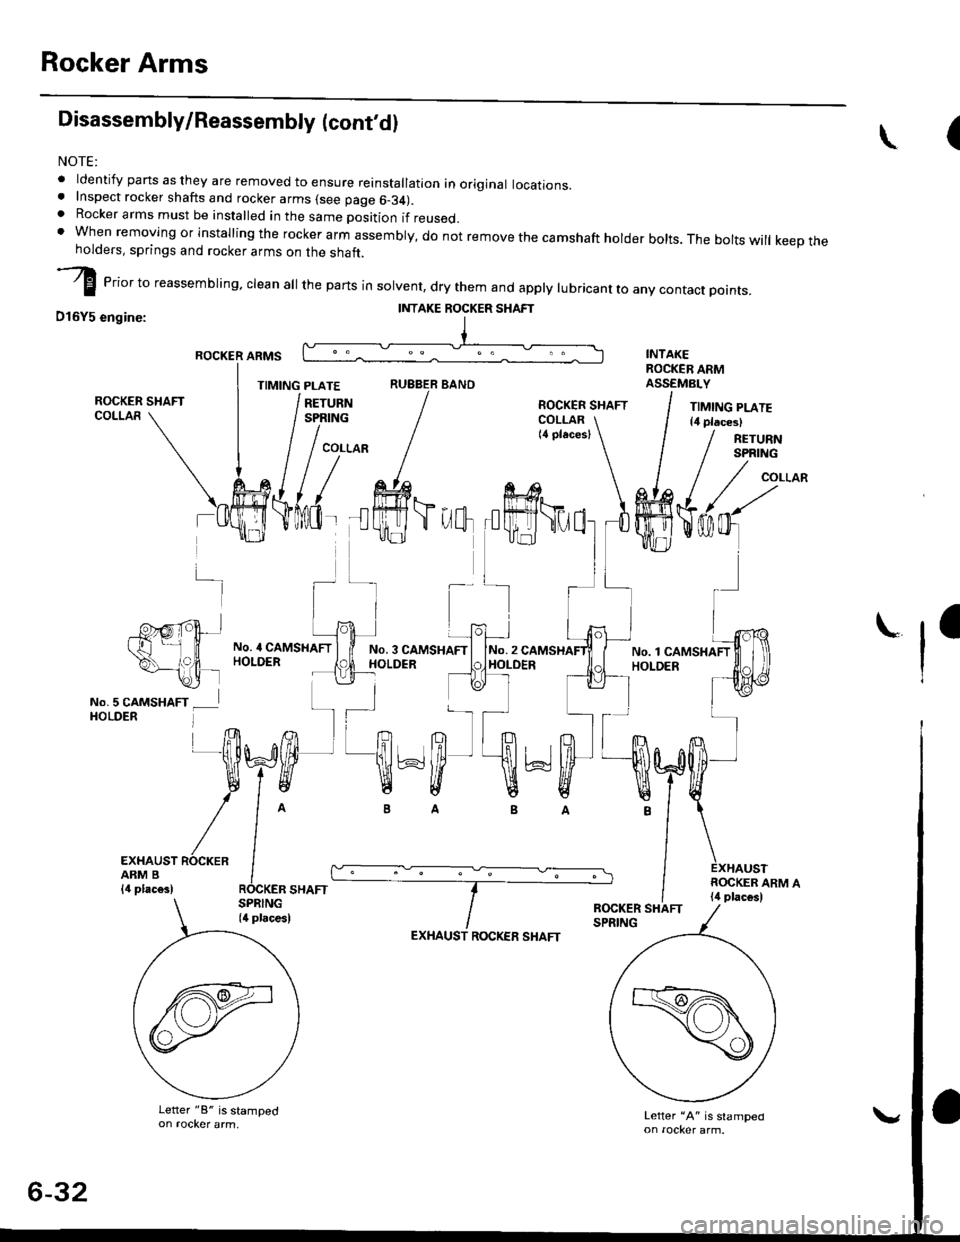 HONDA CIVIC 1996 6.G User Guide Rocker Arms
Disassembly/Reassembly (contdl
NOTE:
. ldentify pans as they are removed to ensure reinstallation in original locations.. Inspect rocker shafts and rocker arms (see page 6-34).. Rocker ar